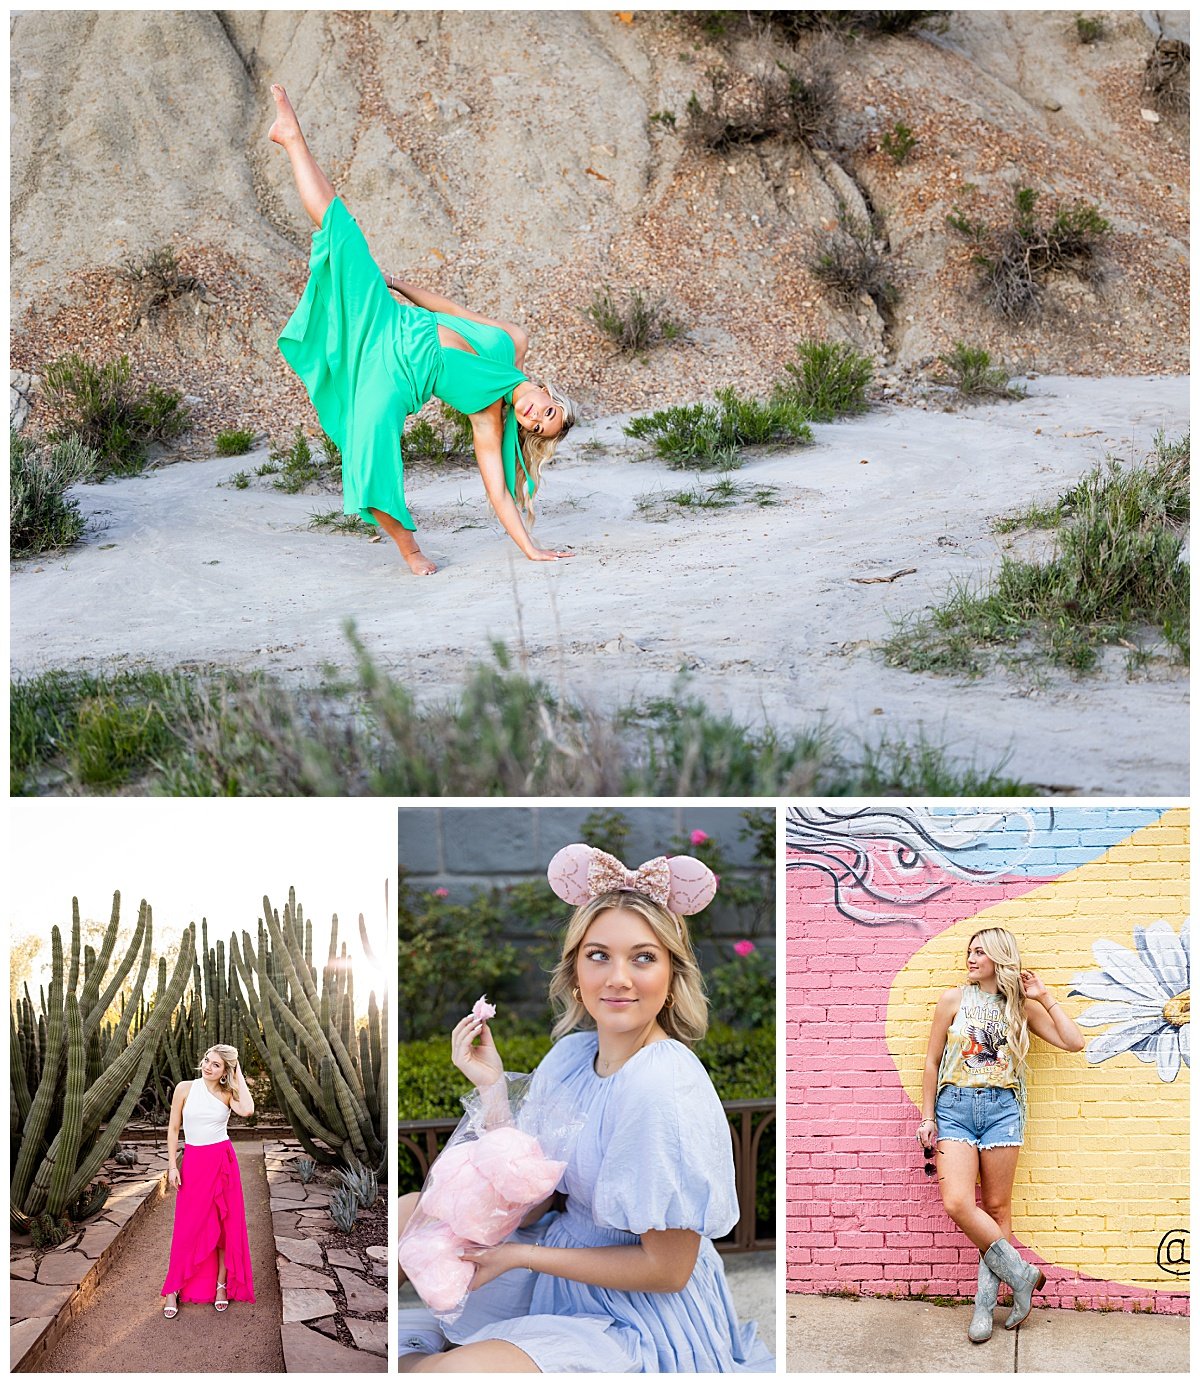 A collage of photos depicts multiple travel senior sessions showcasing a blonde young woman on trips with her mother to celebrate senior year ranging from Arizona to Tennessee.